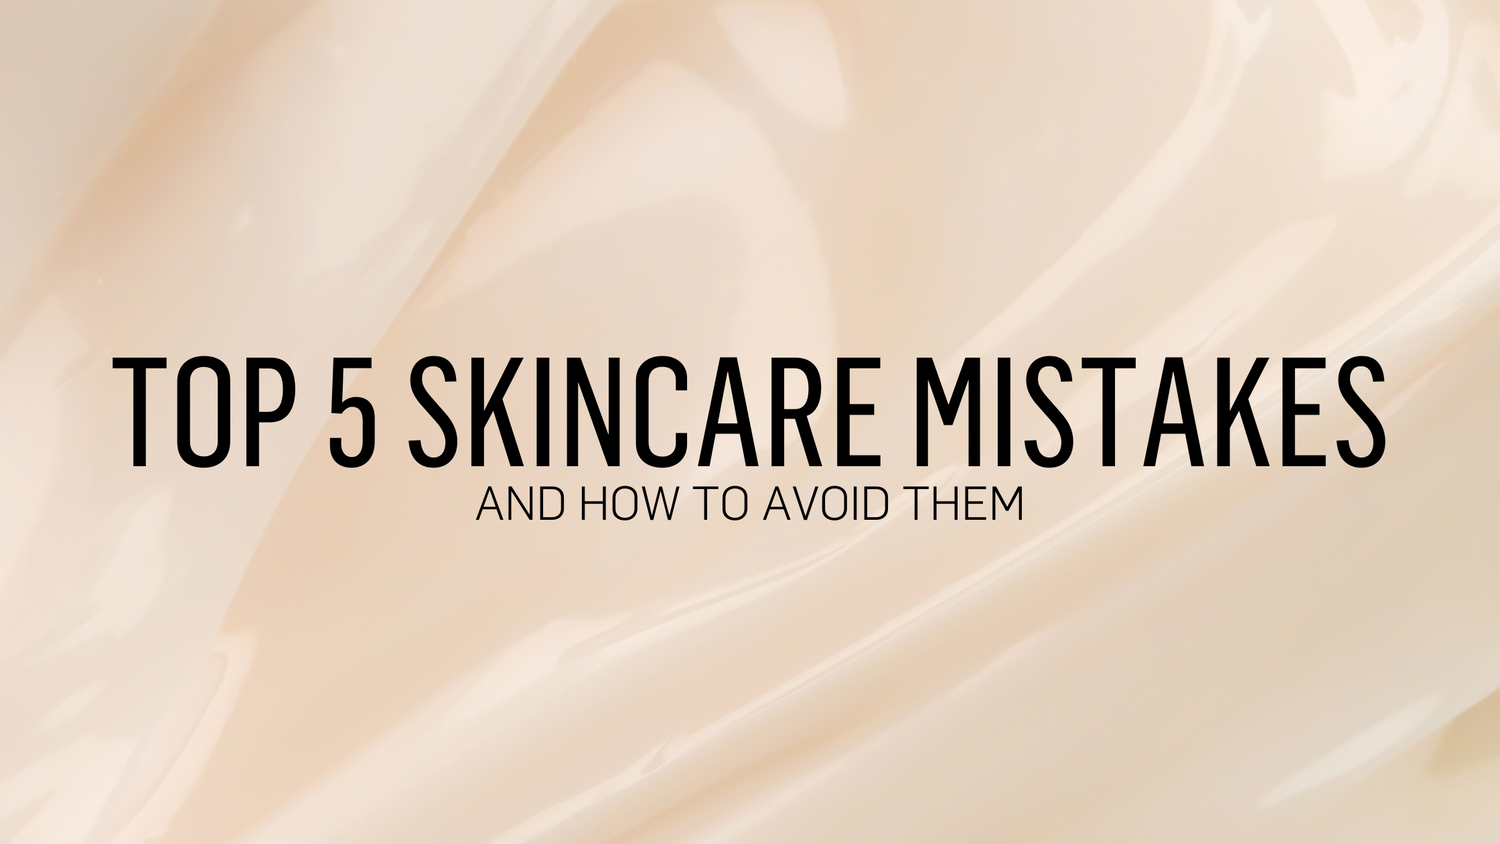 Top 5 Skincare Mistakes and How to Avoid Them